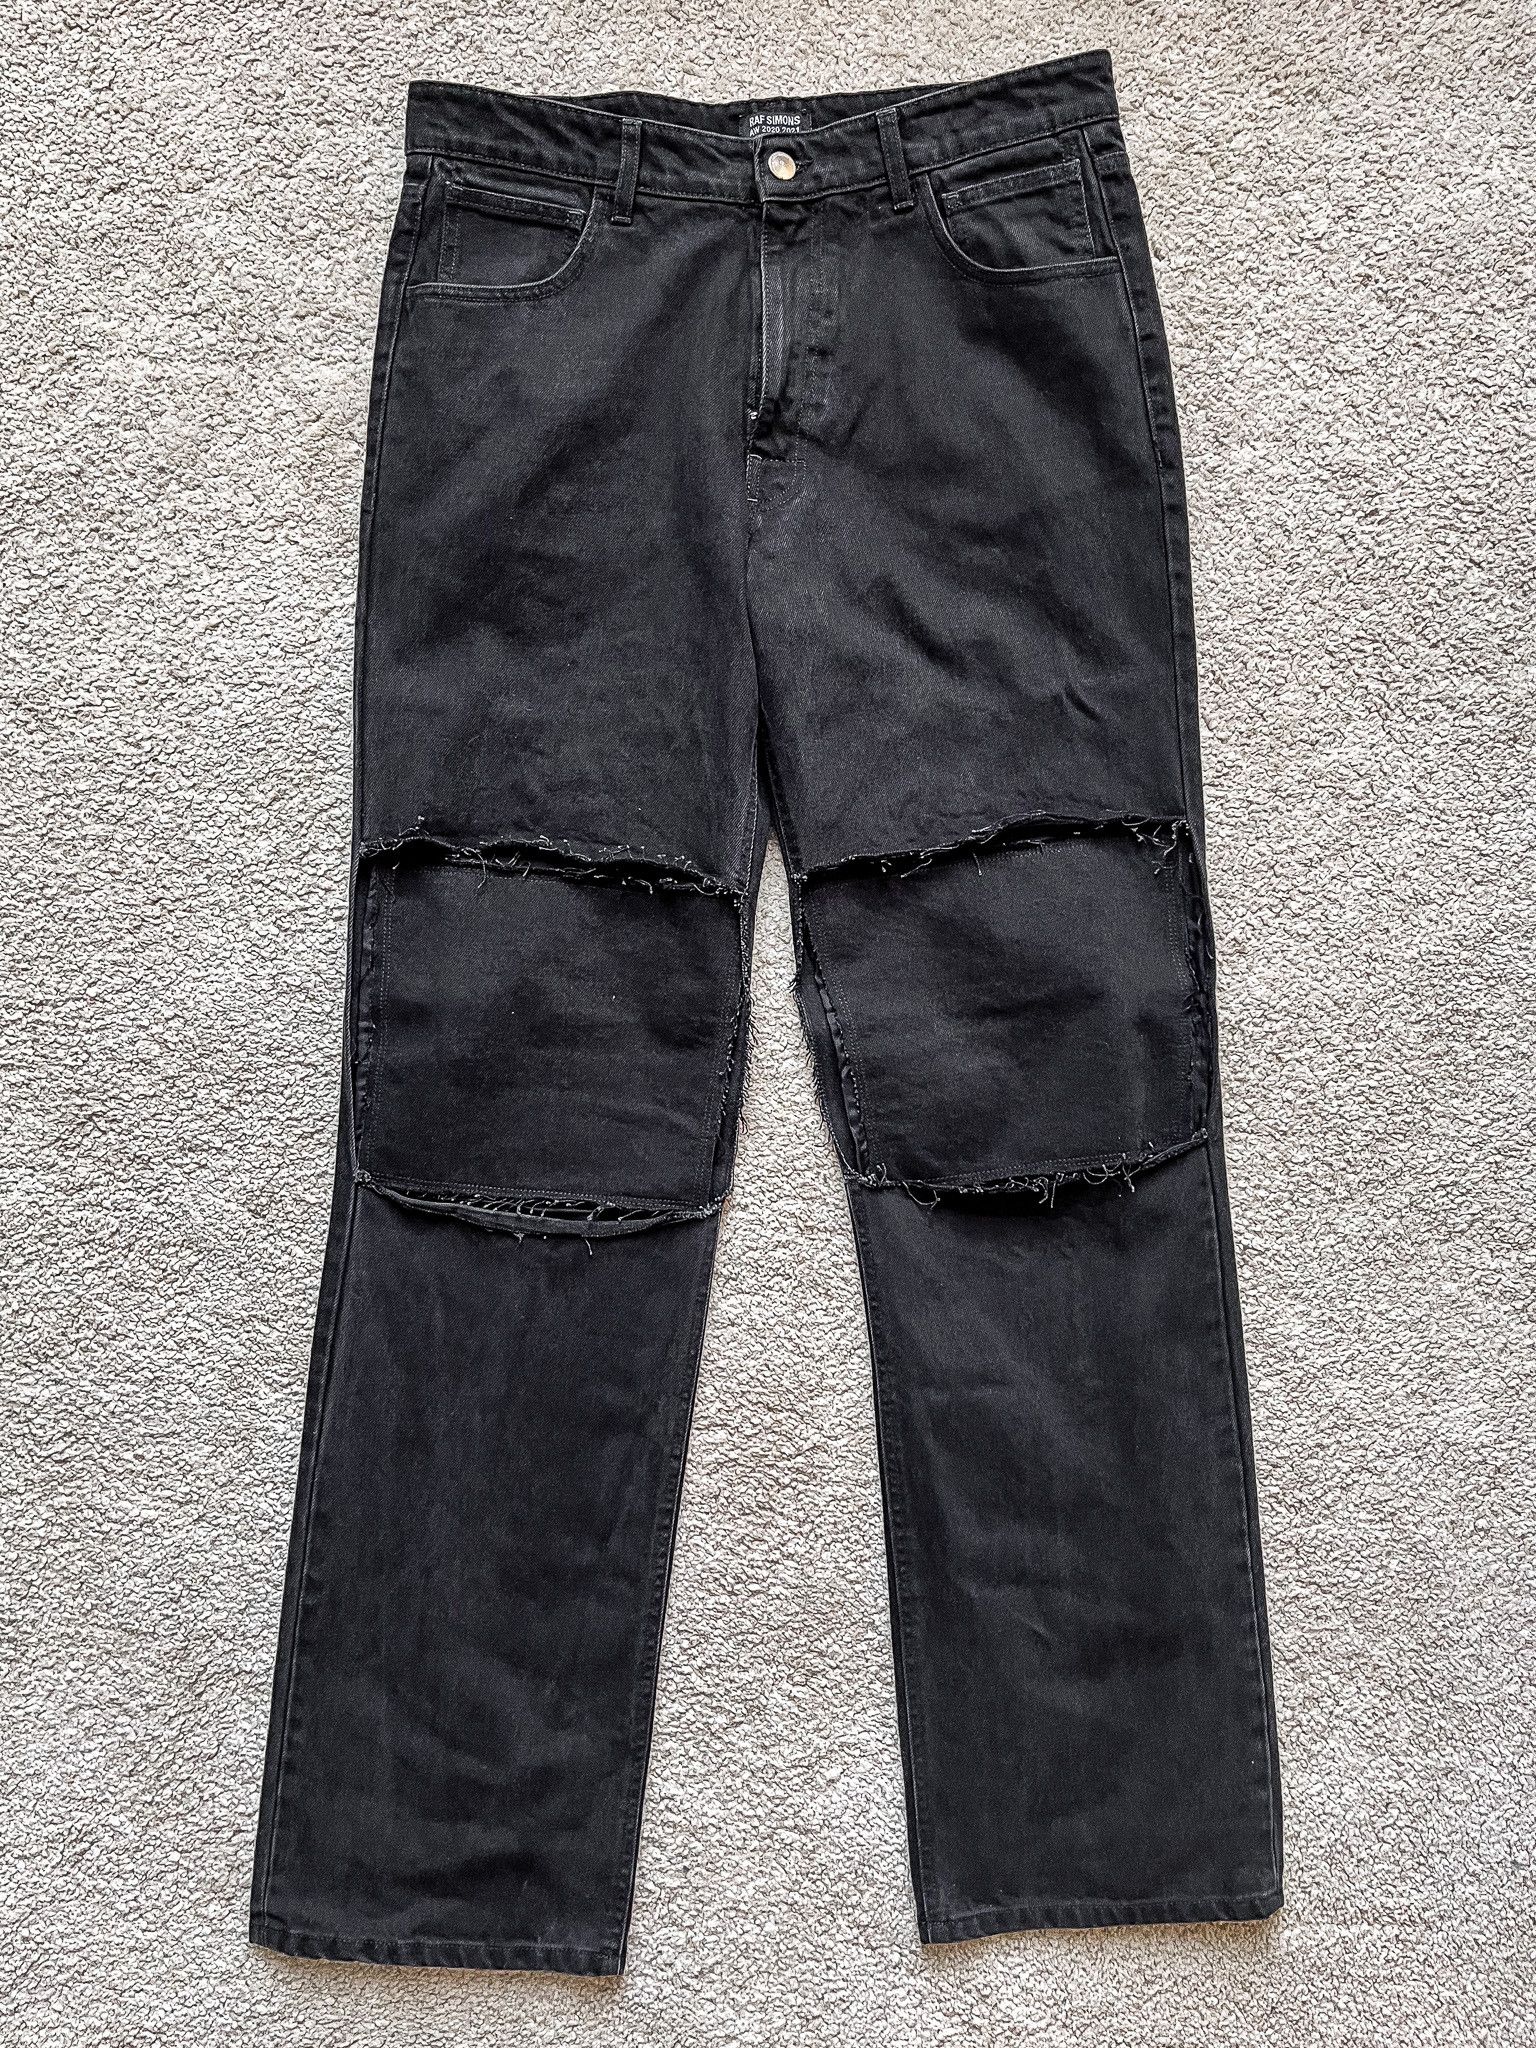 Raf Simons Relaxed Fit Denim Pants With Cut Out Knee Patches | Grailed